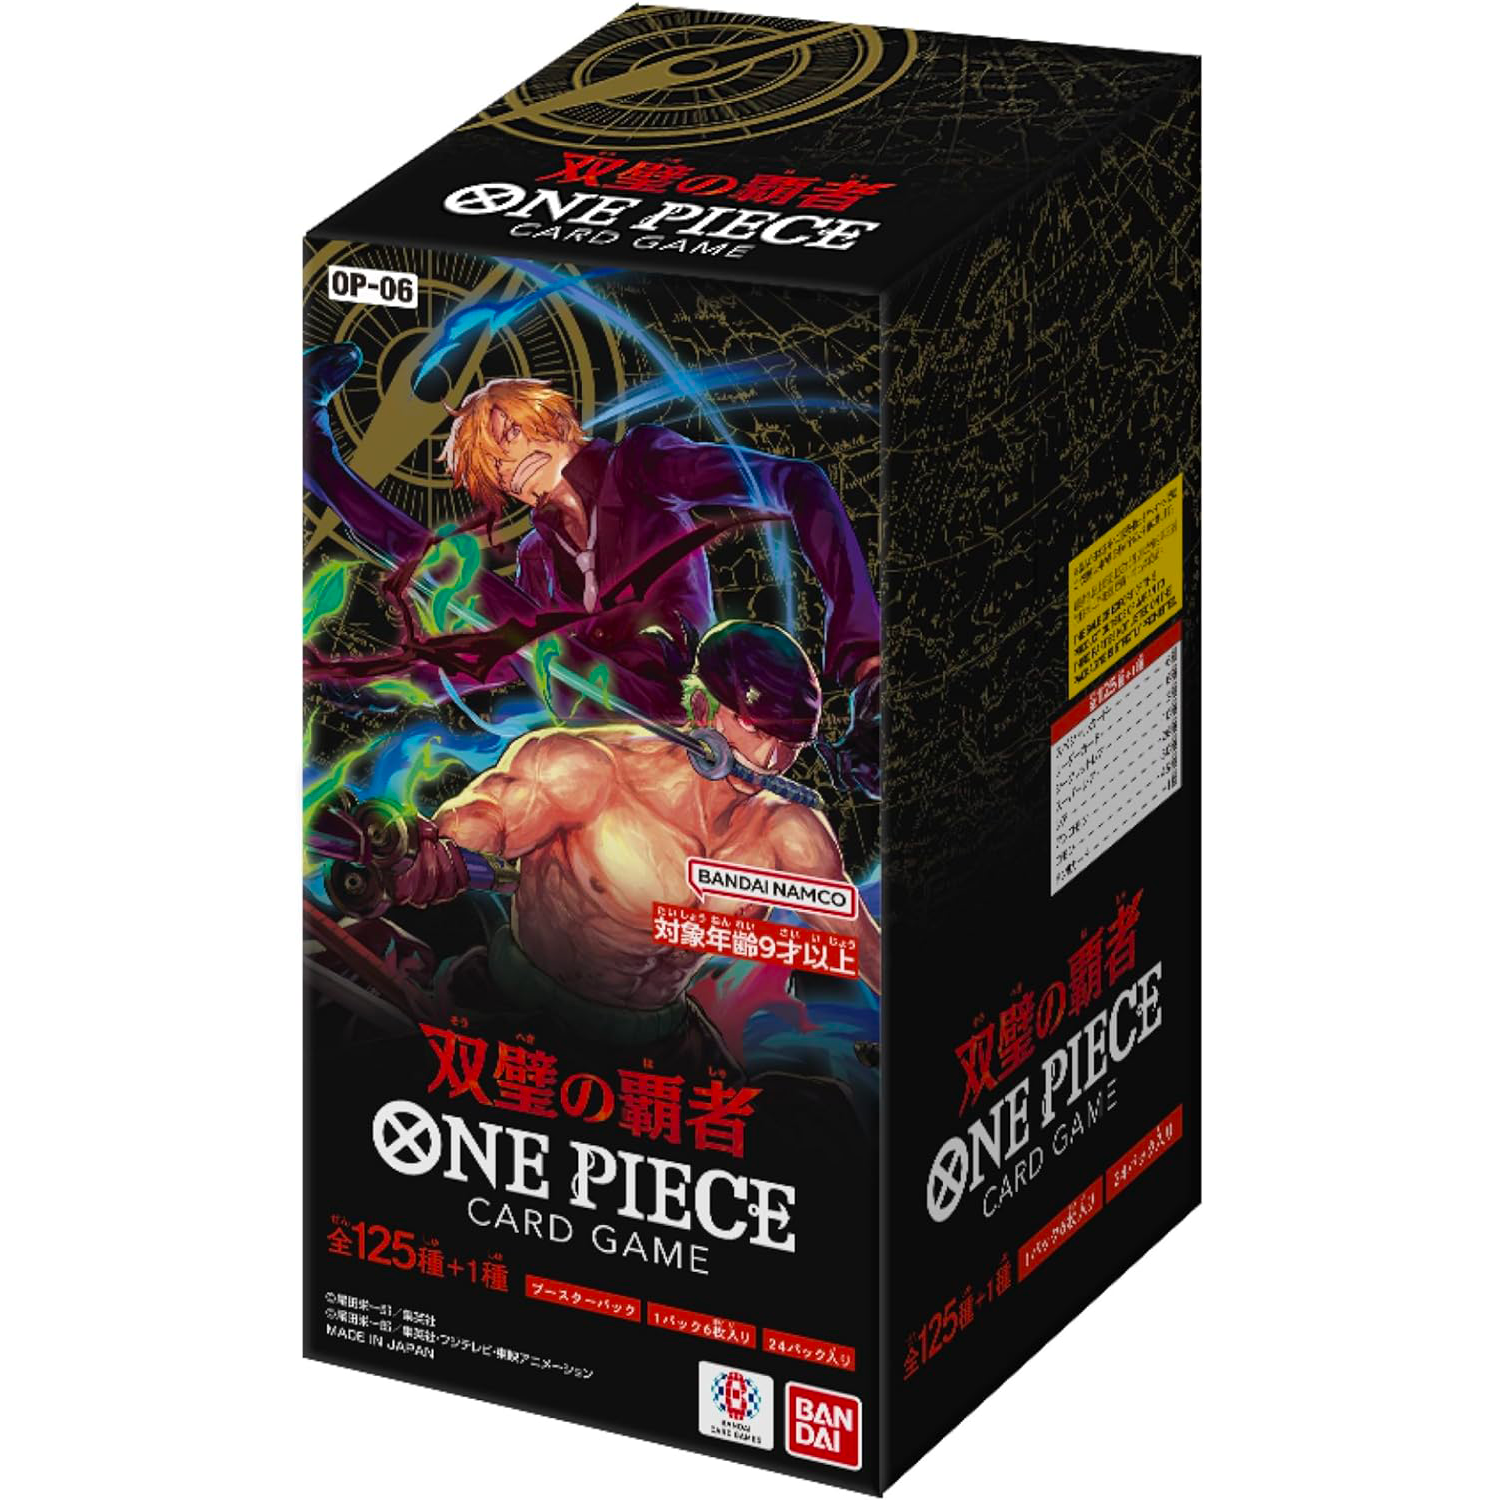 [OP-06] ONE PIECE CARD GAME Booster Pack ｢Wings of Captain｣ Box